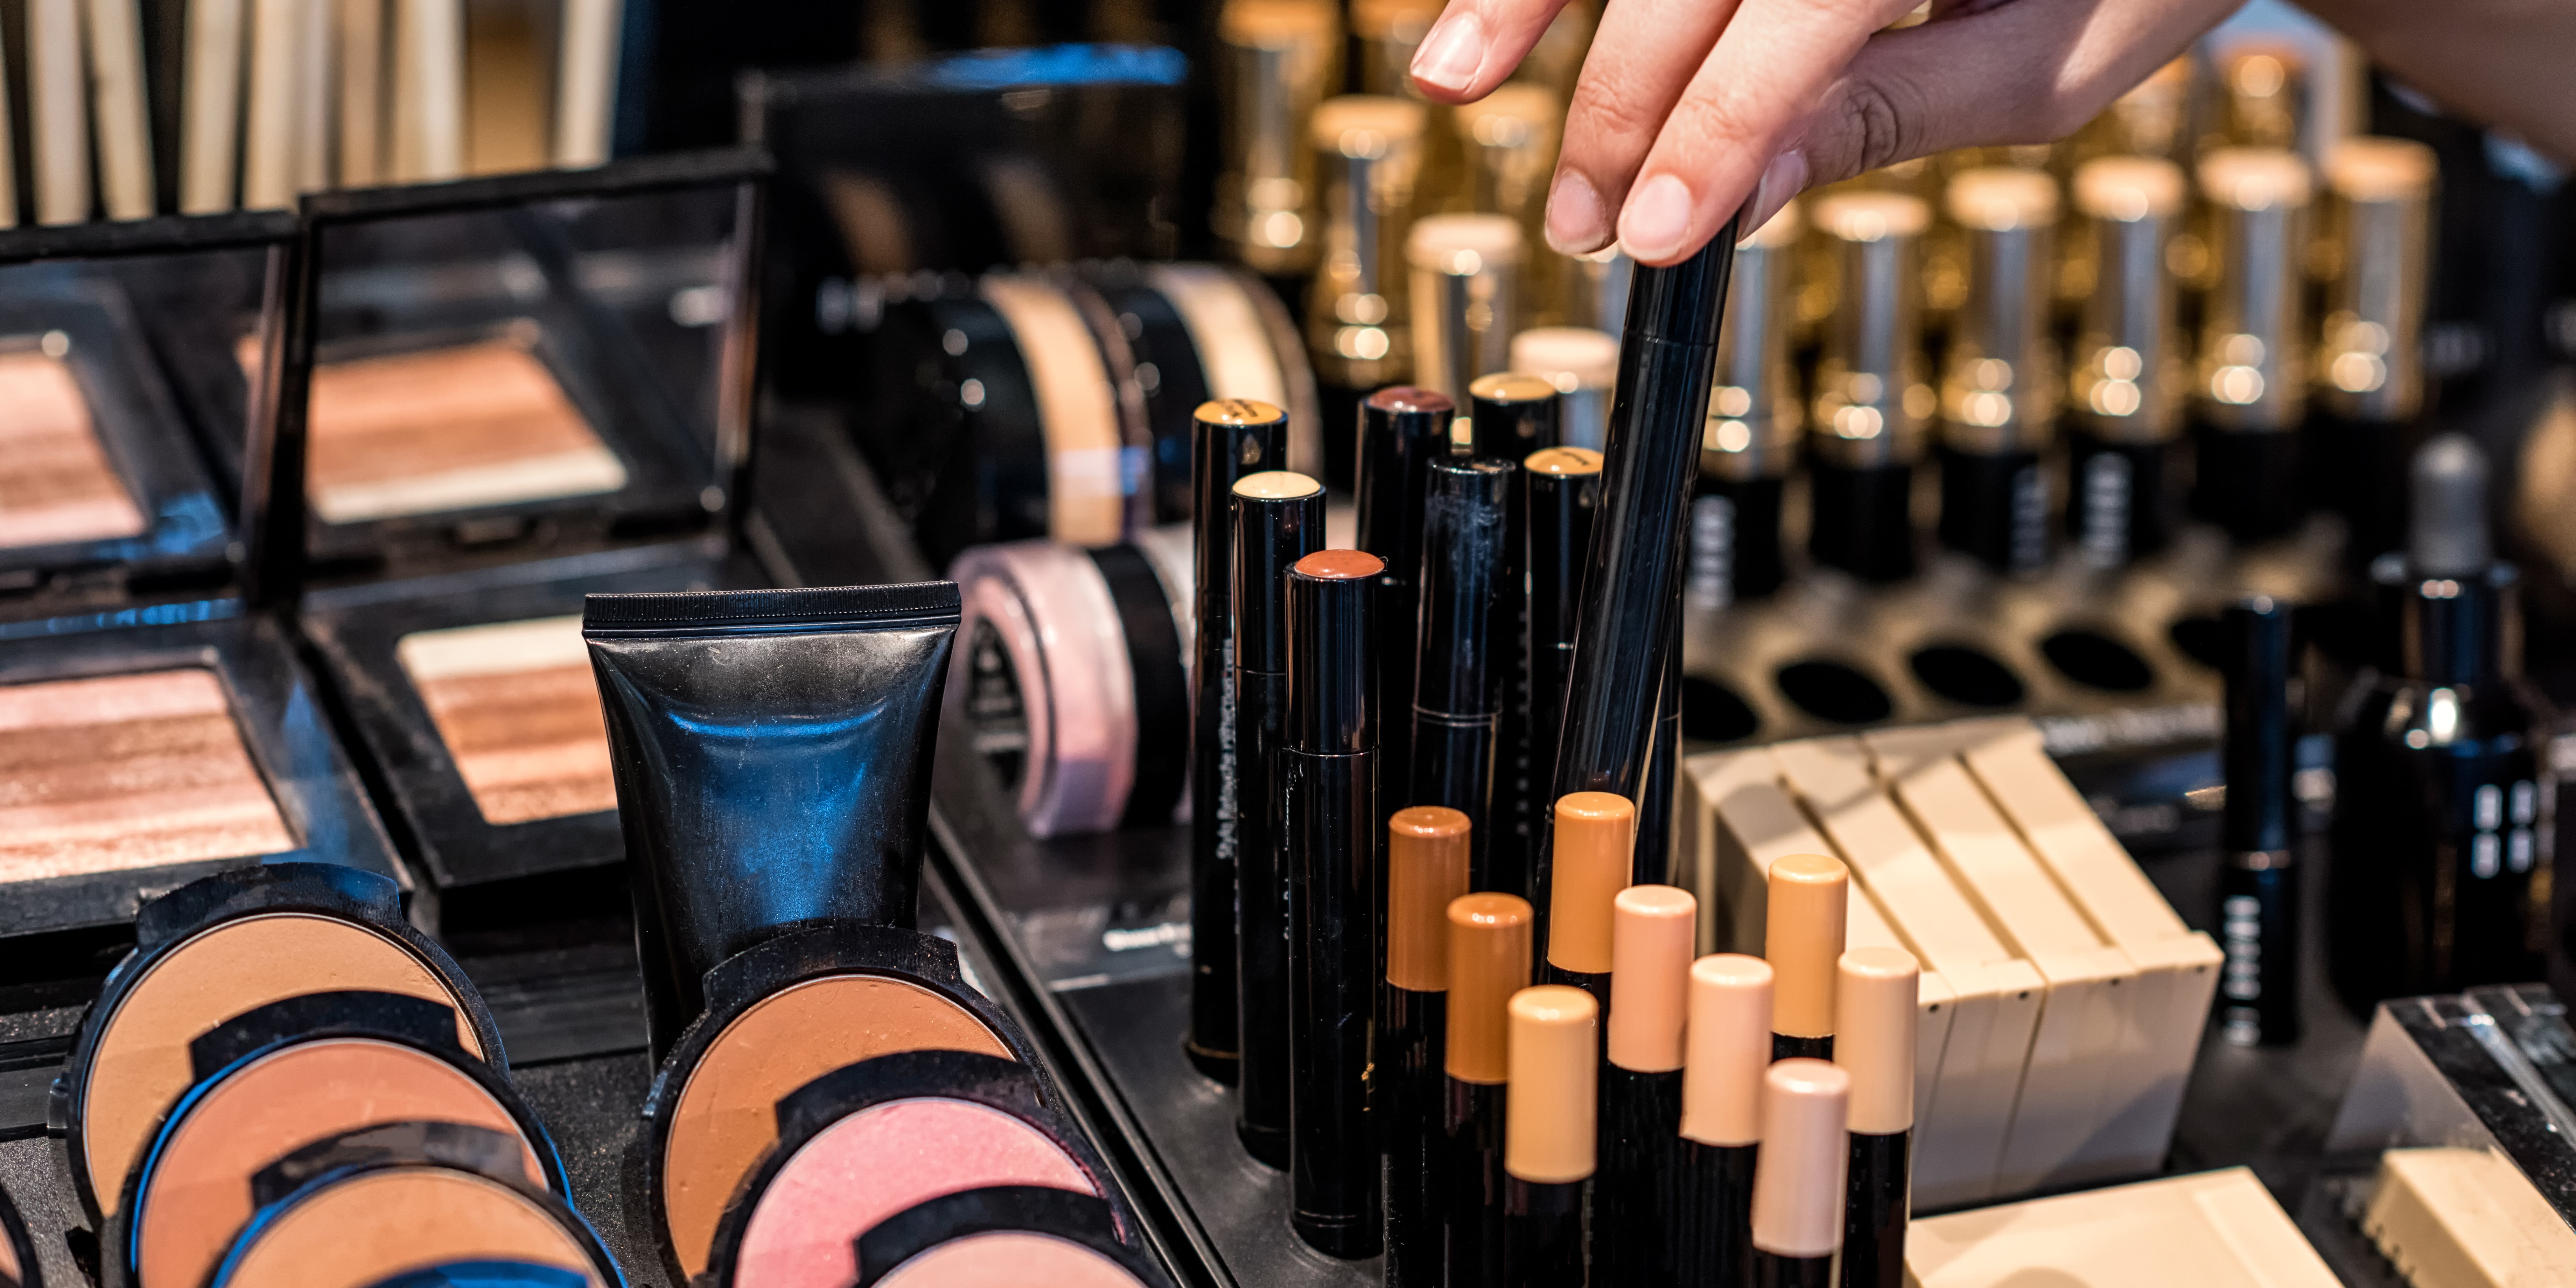 How Often Do Beauty Brands Fail, and Why?